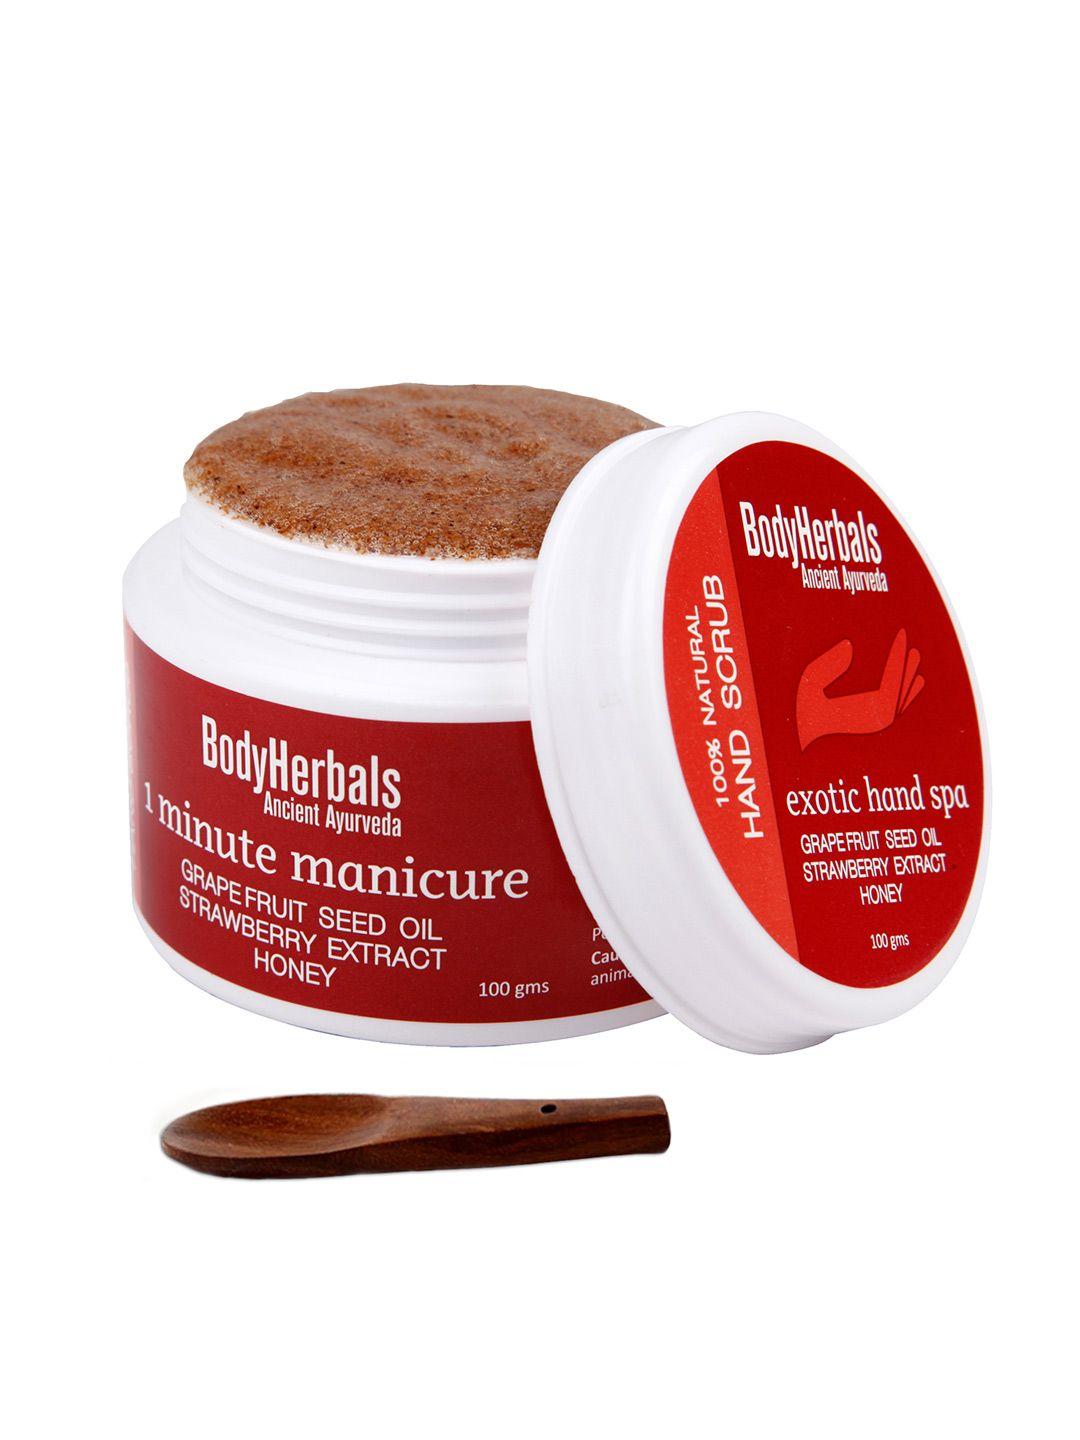 bodyherbals 1 minute strawberry extract elbow and hand manicure scrub - 100 gm